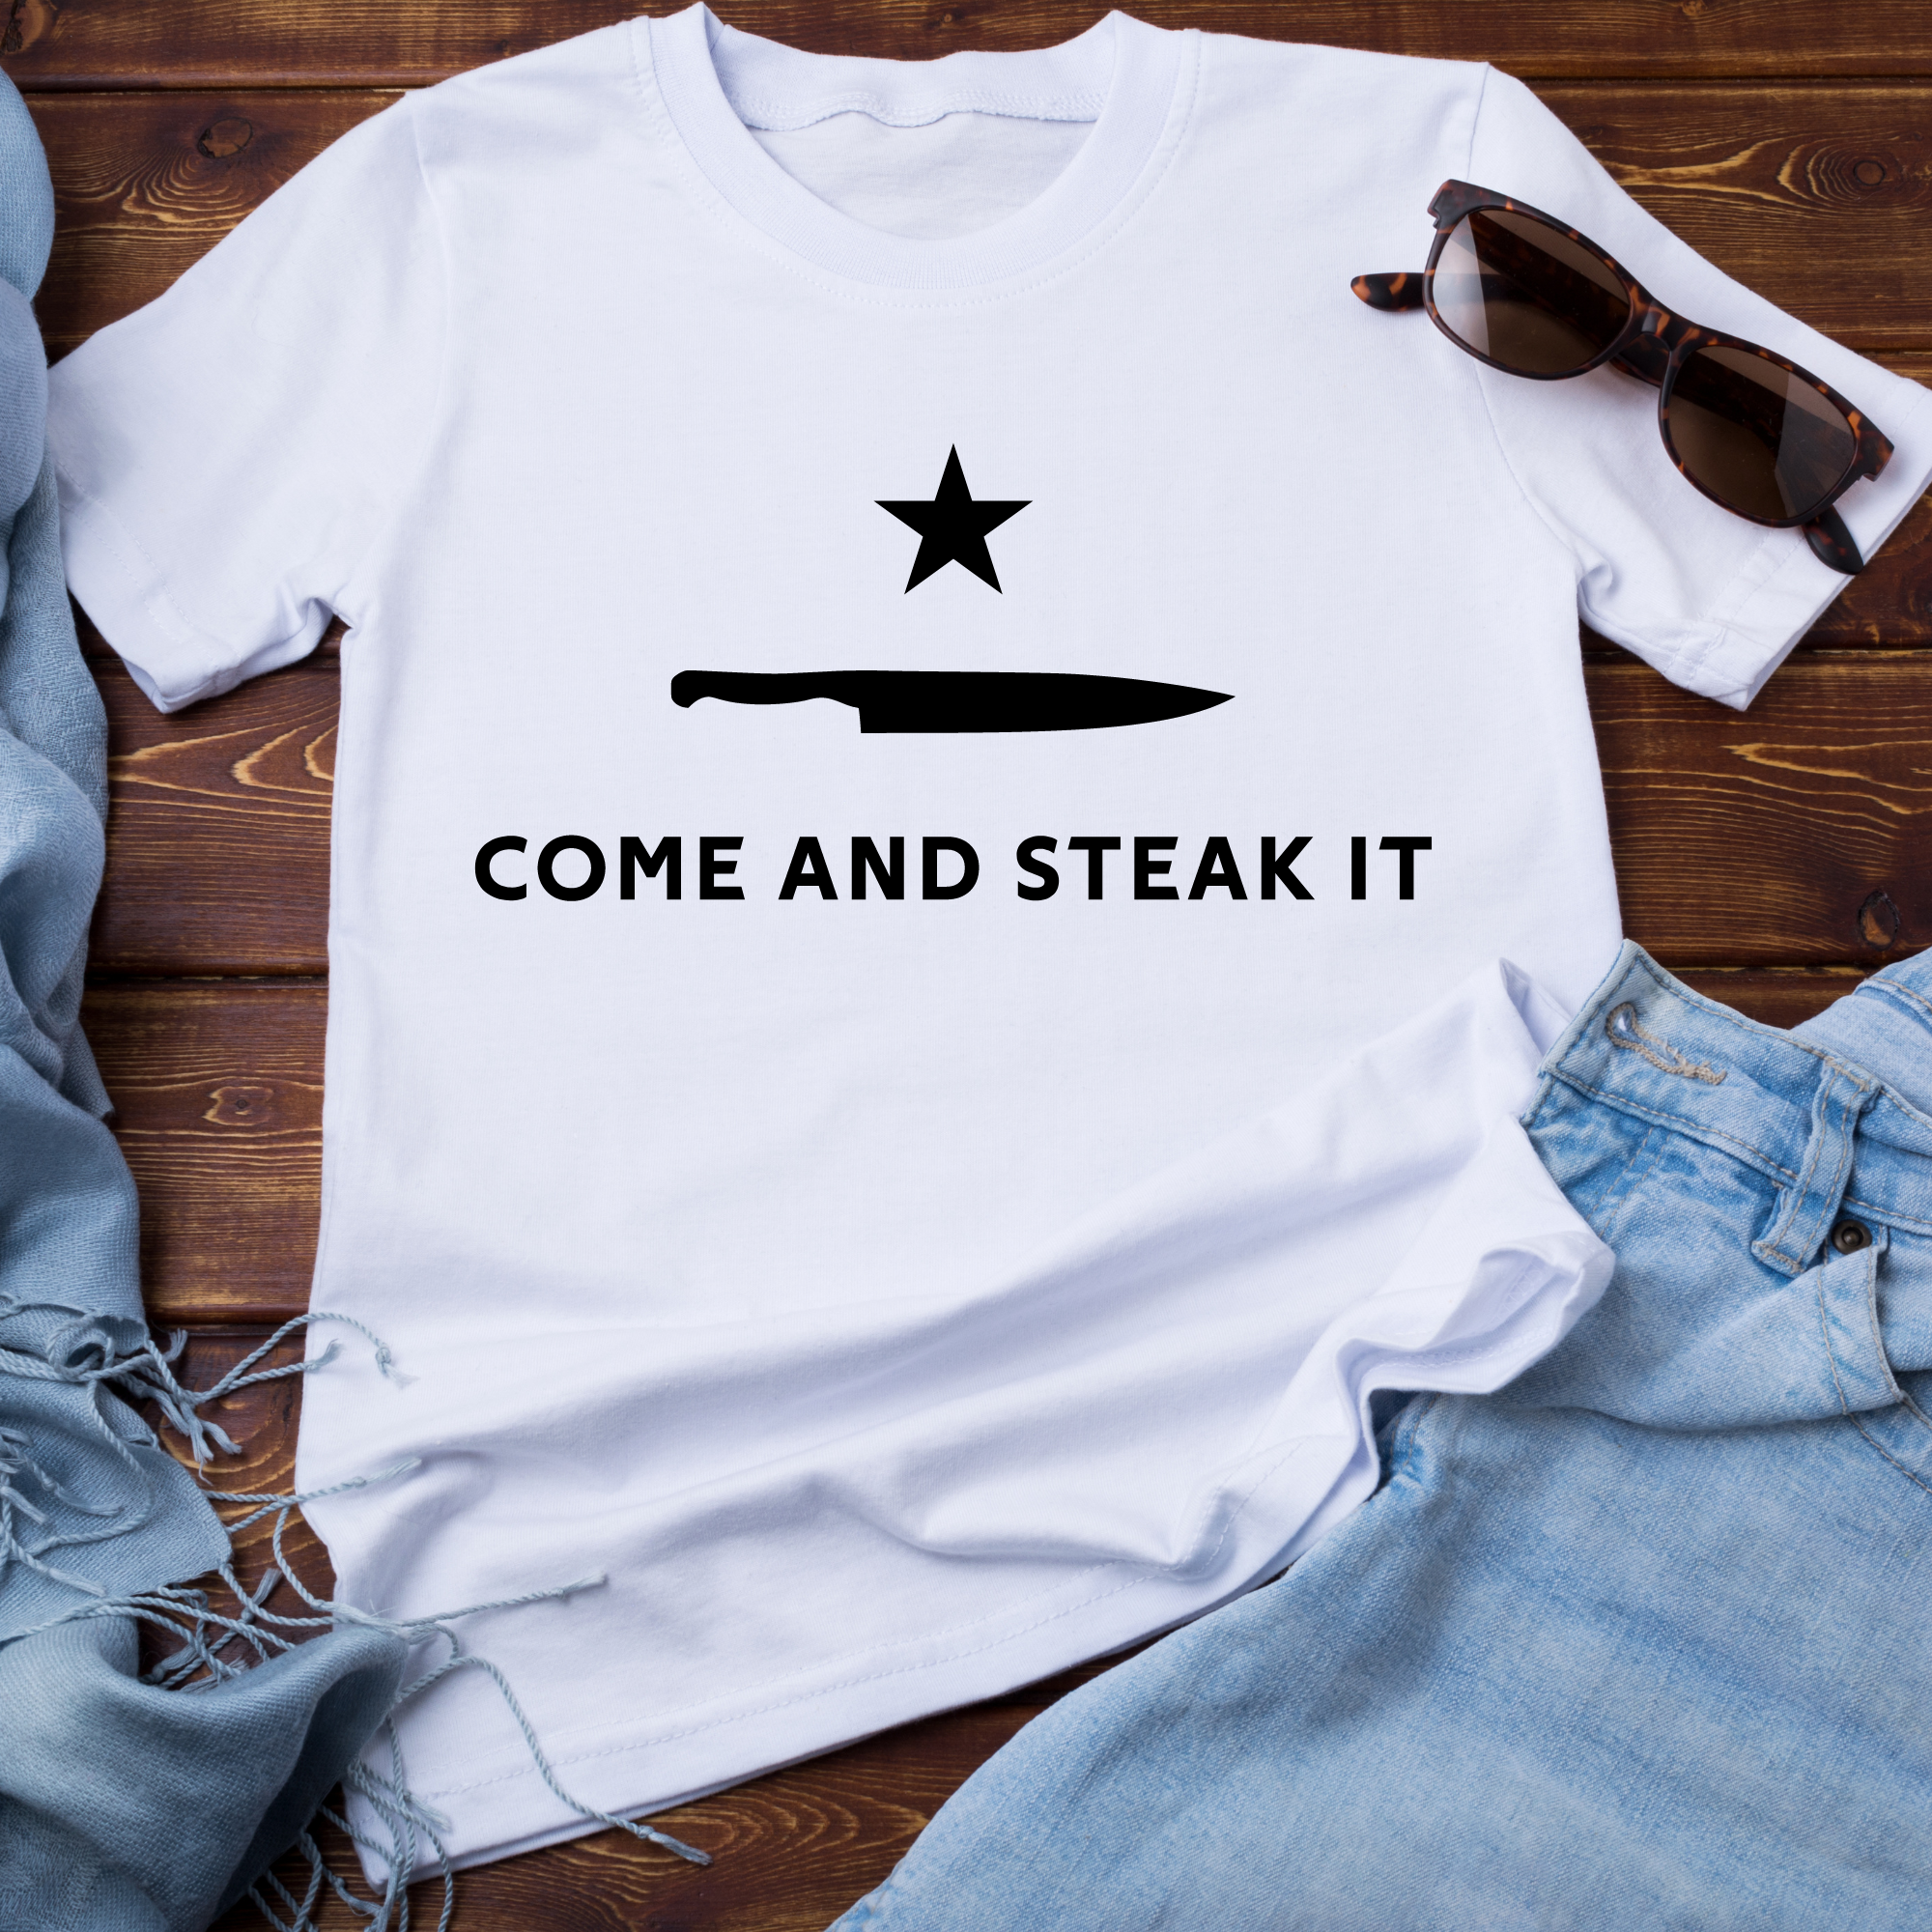 Come and Steak It T-Shirt